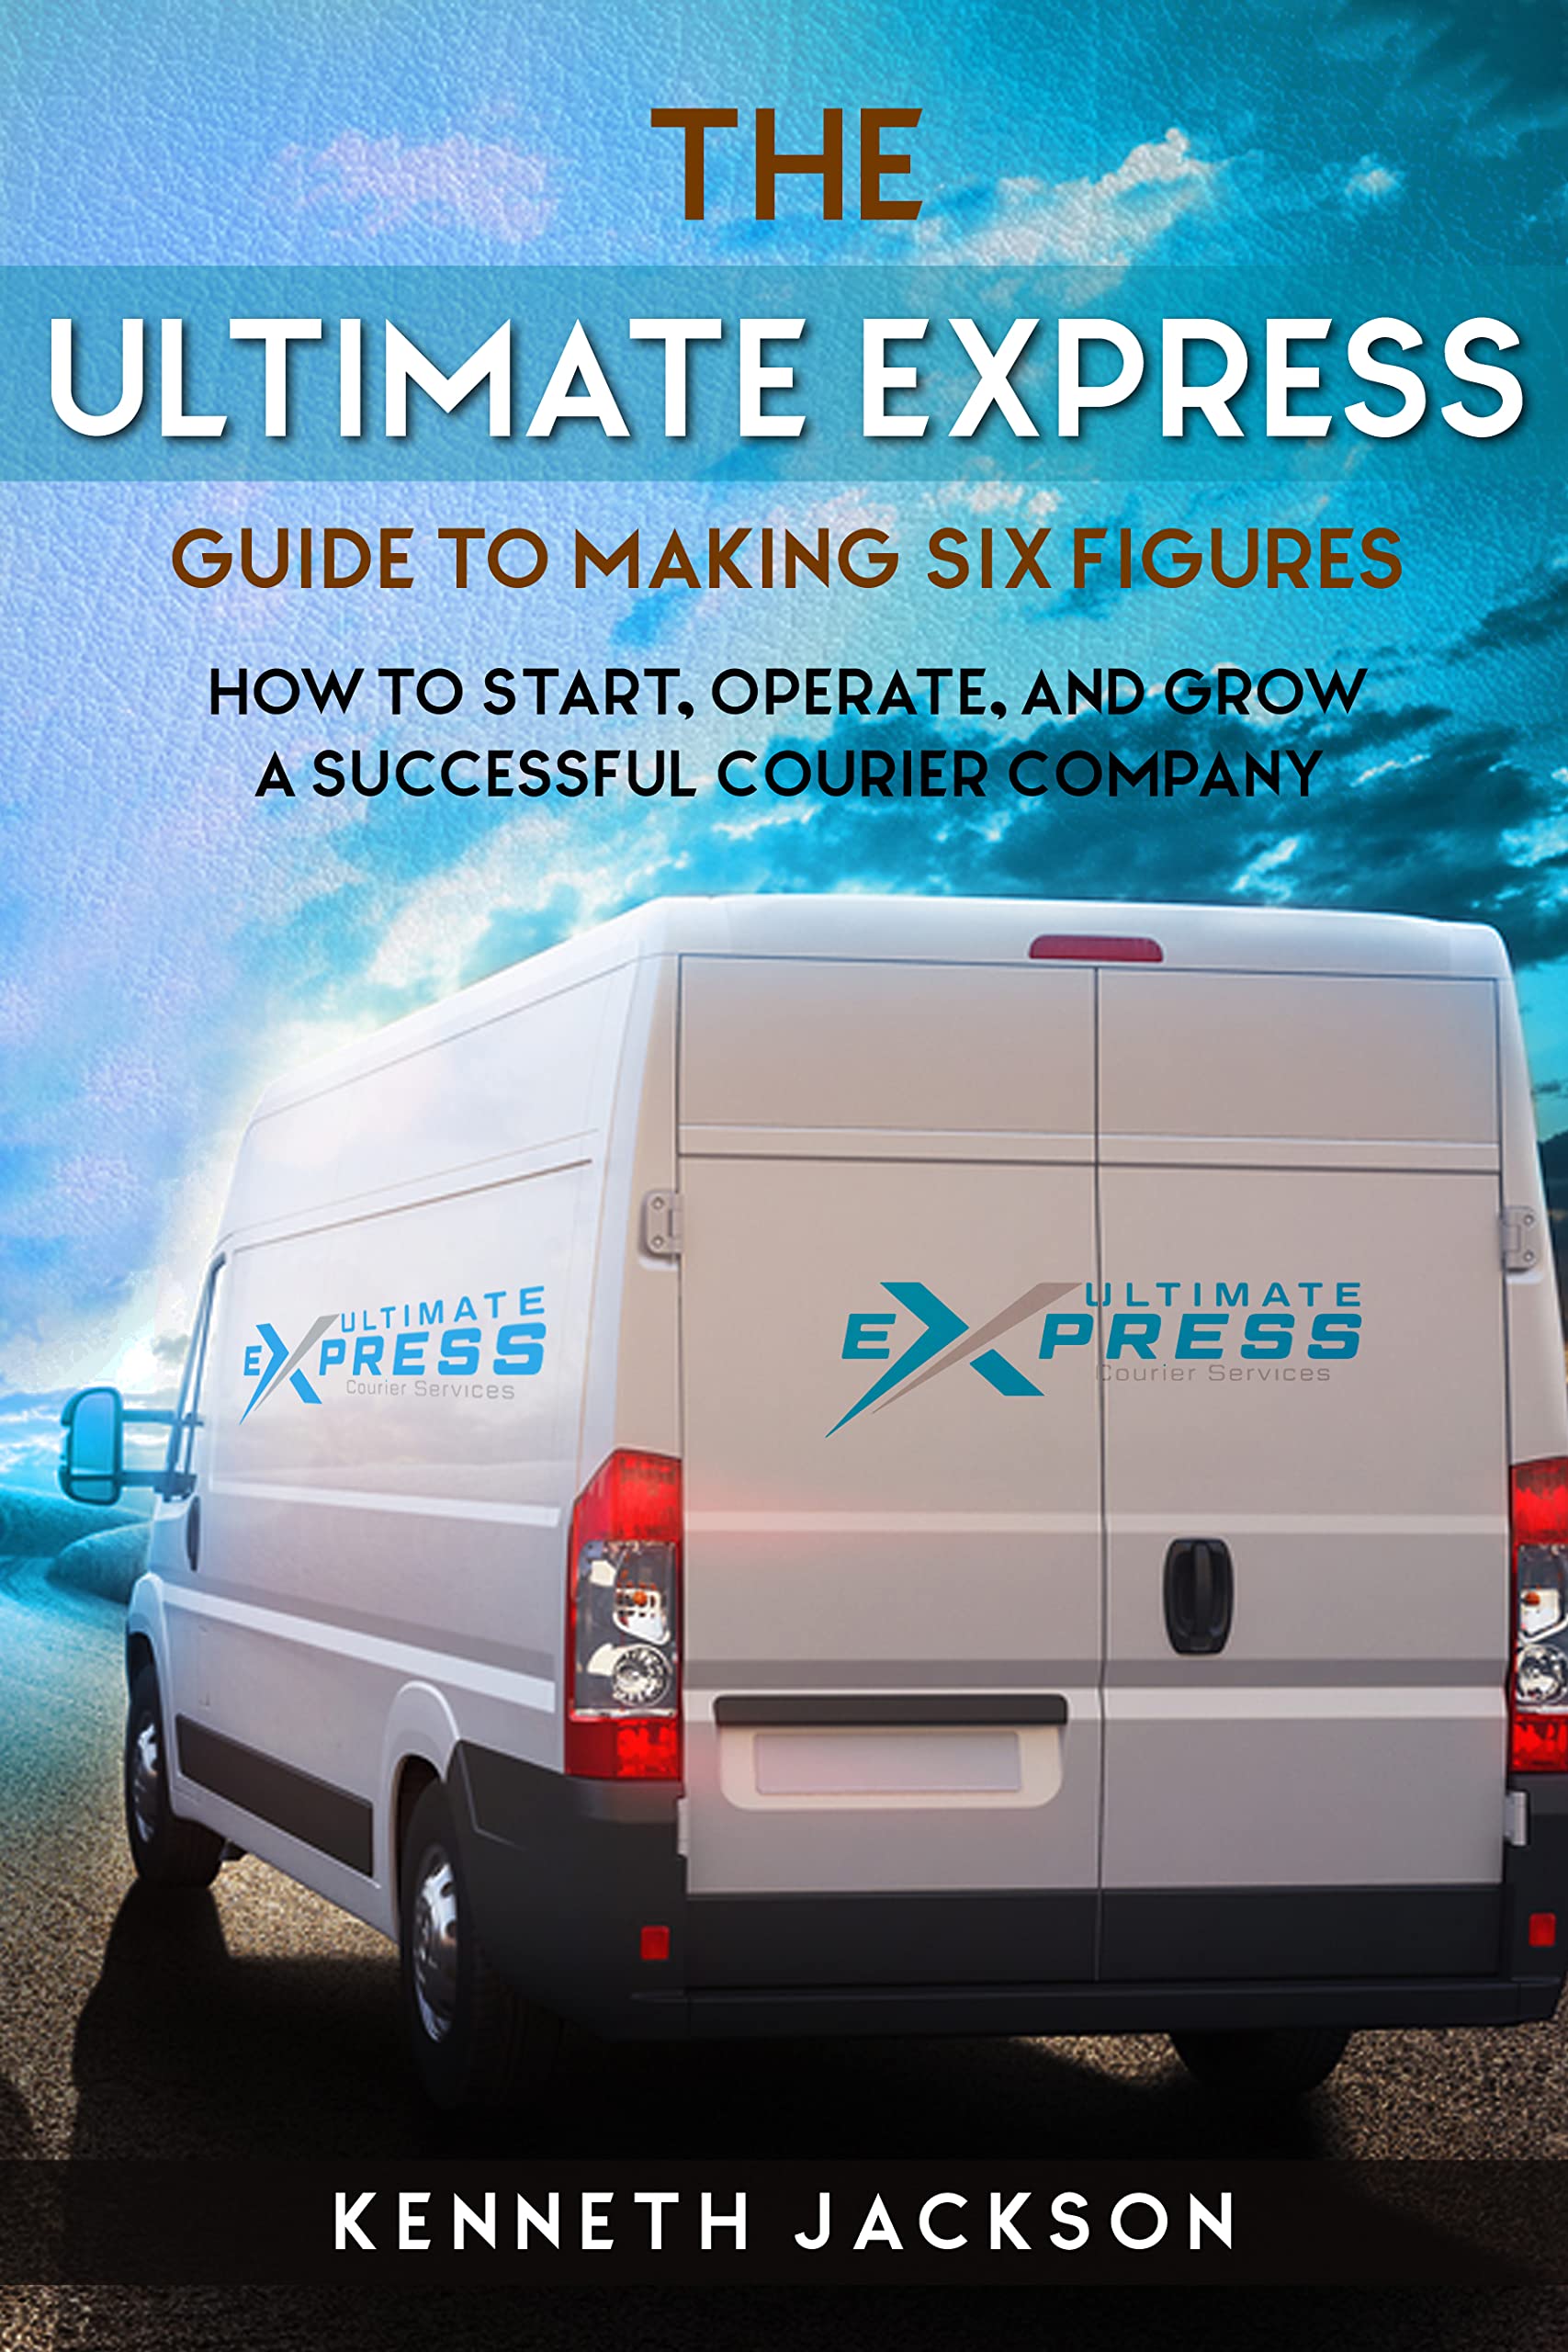 The Ultimate Express Guide To Making Six Figures: How To Start, Operate, And Grow A Successful Courier Company